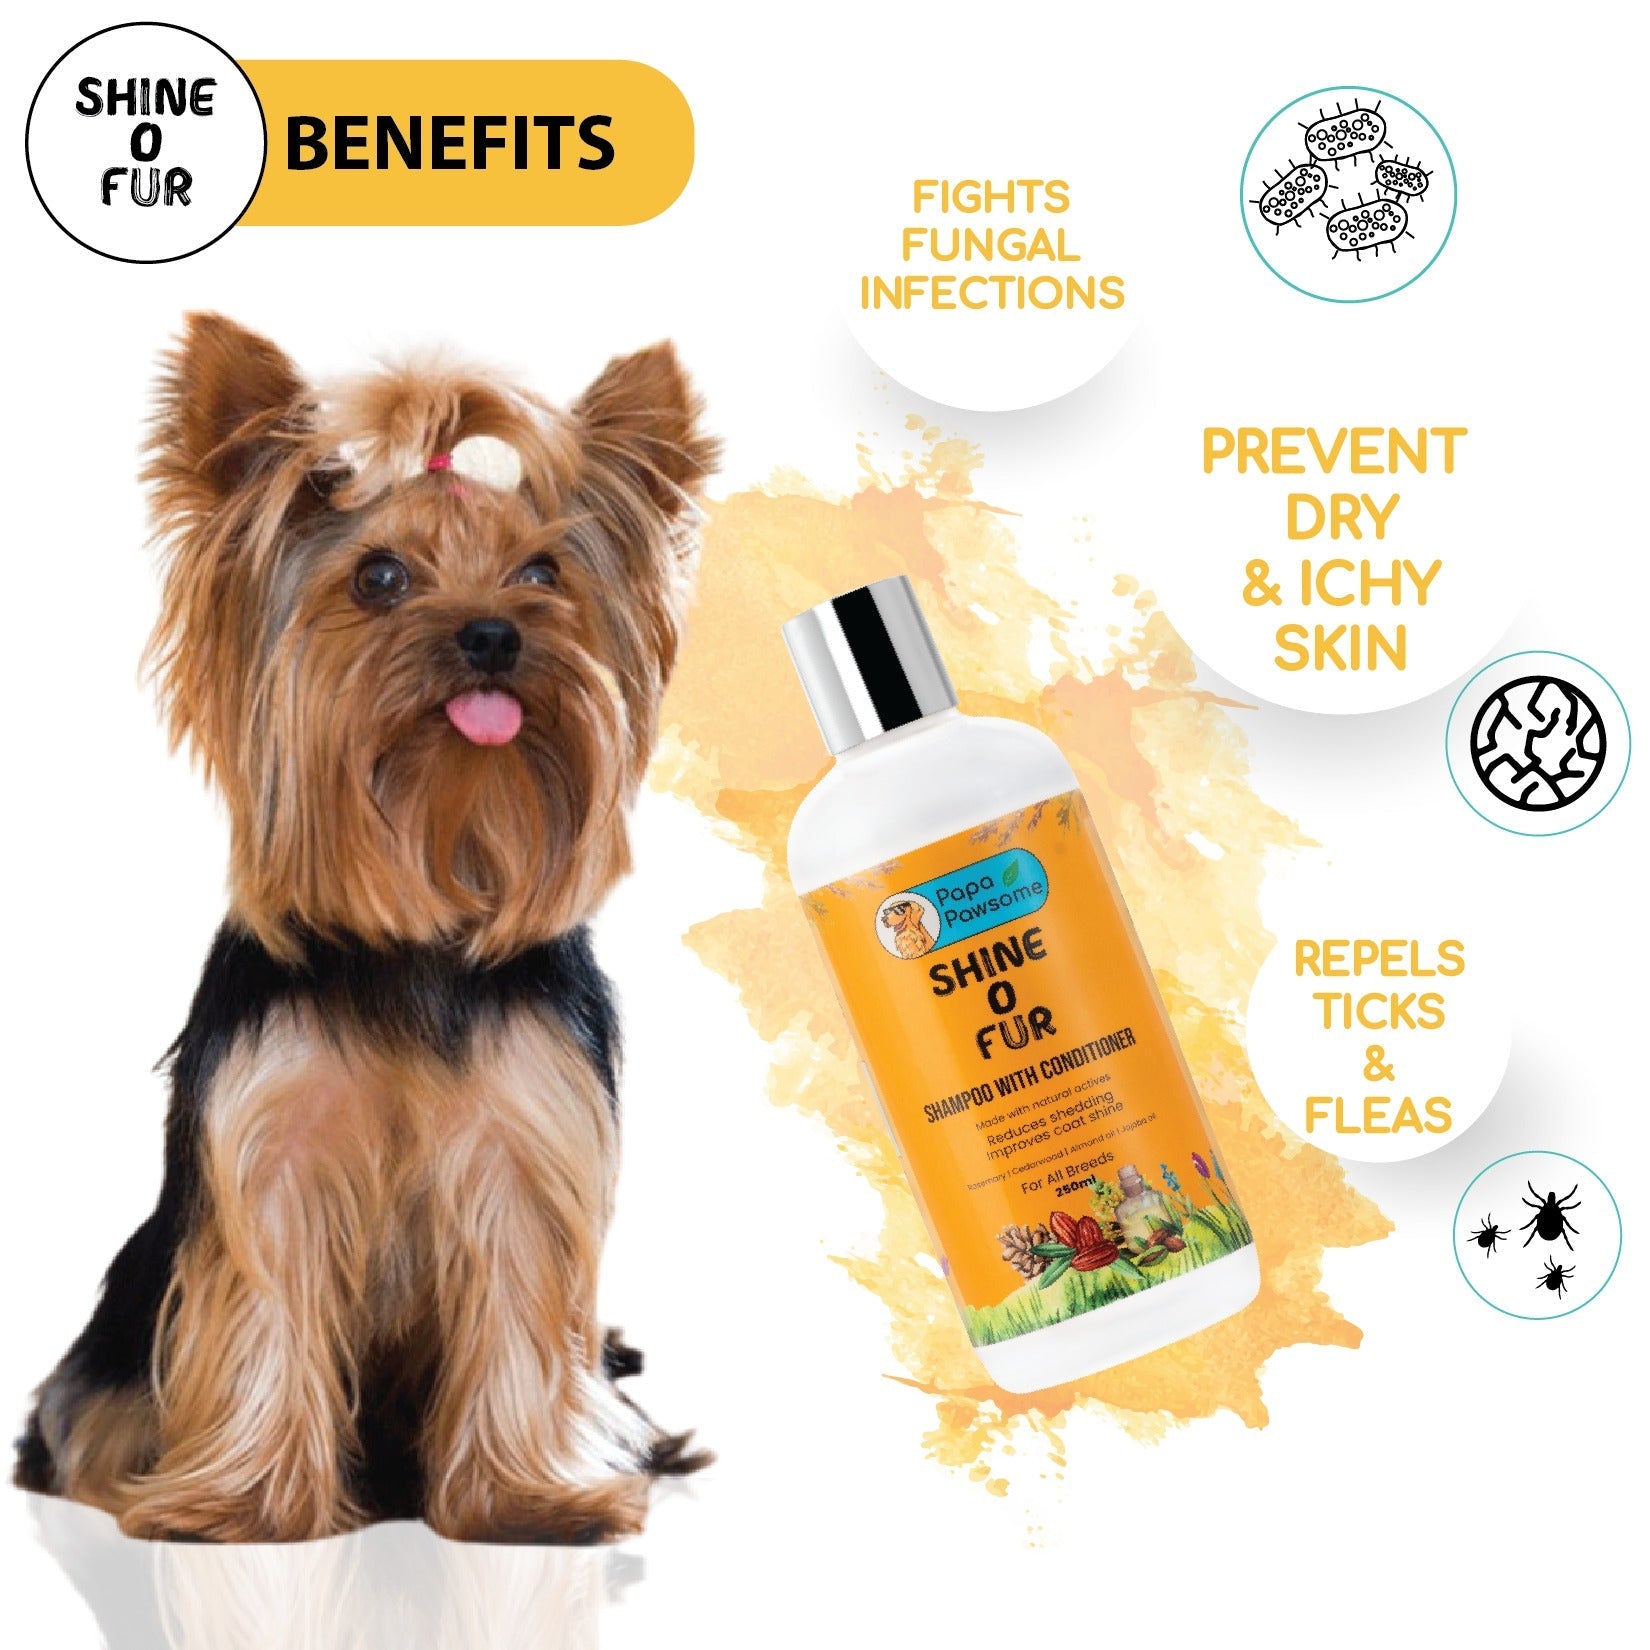 Yorkshire Terrier Complete Grooming kit - Papa Pawsome